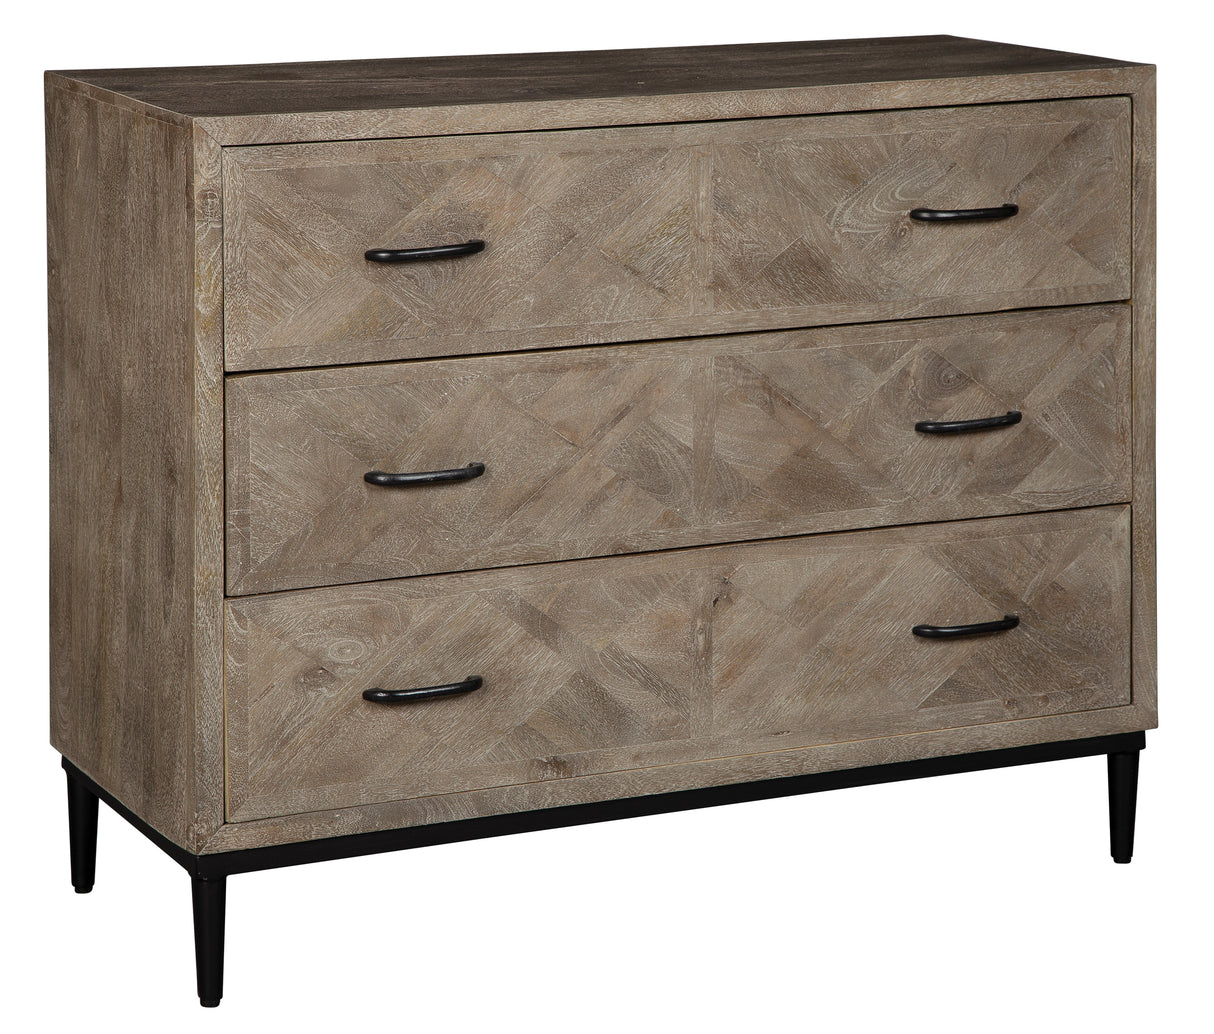 Hekman 28633 Accents 44.25in. x 19.5in. x 36.5in. Accent Chest